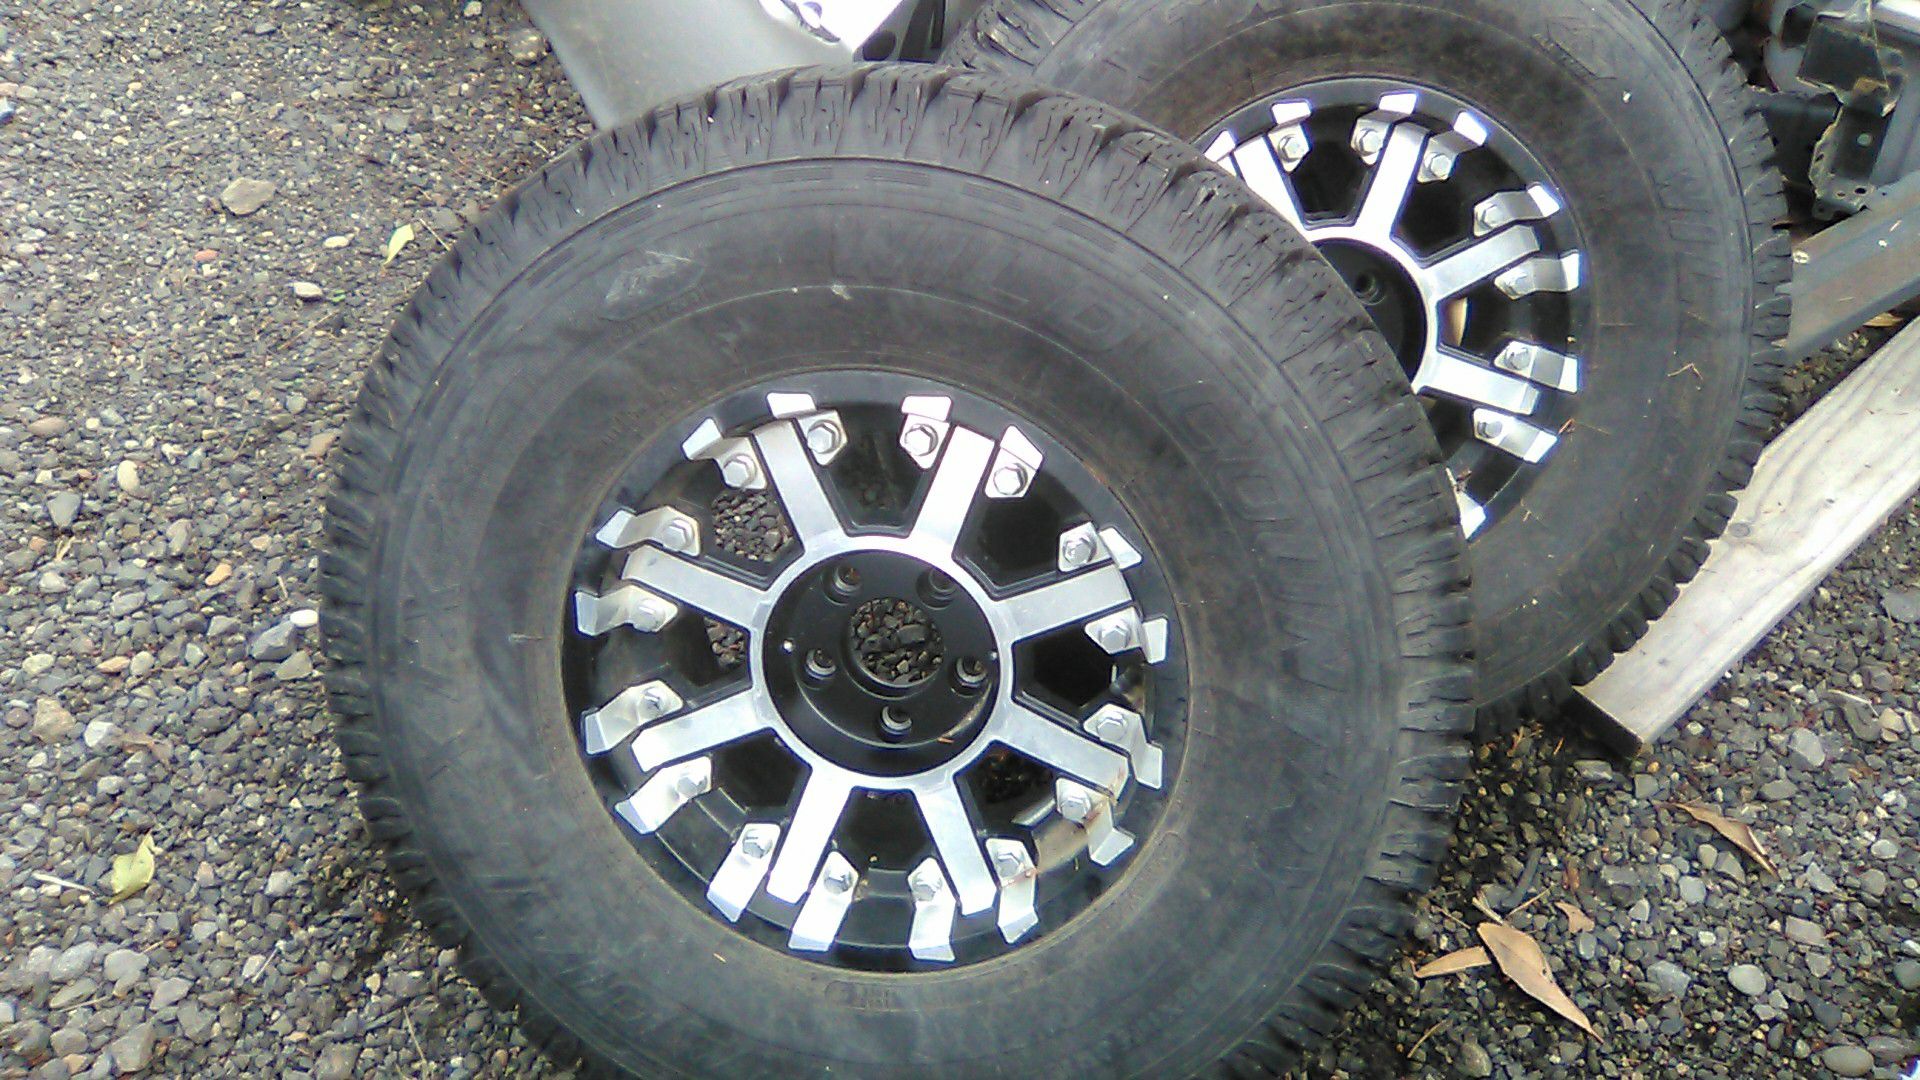 Jeep Wrangler aftermarket wheels like new tires